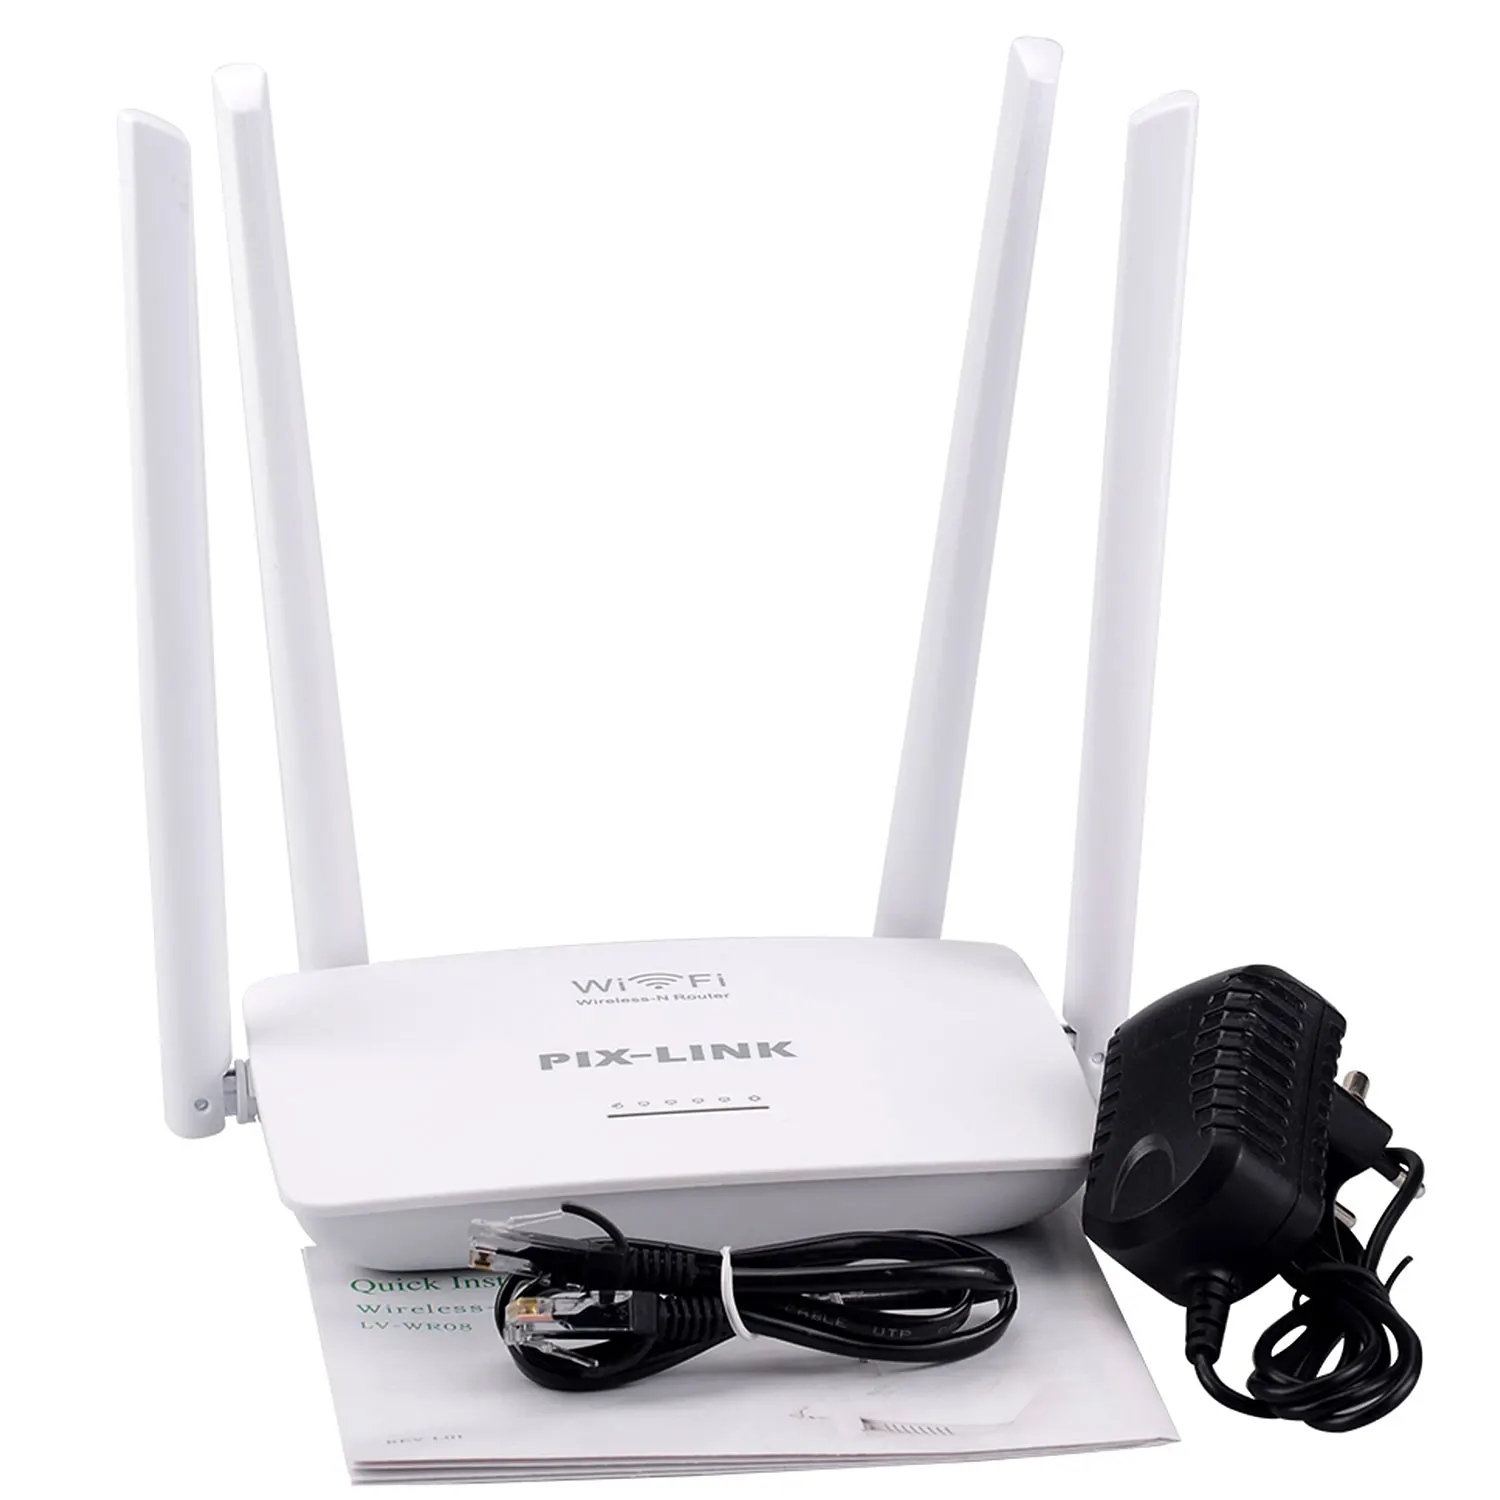 

AP Router Repeater Signal-Booster Range-Extender Mini Portable Wireless Wifi 300mbps